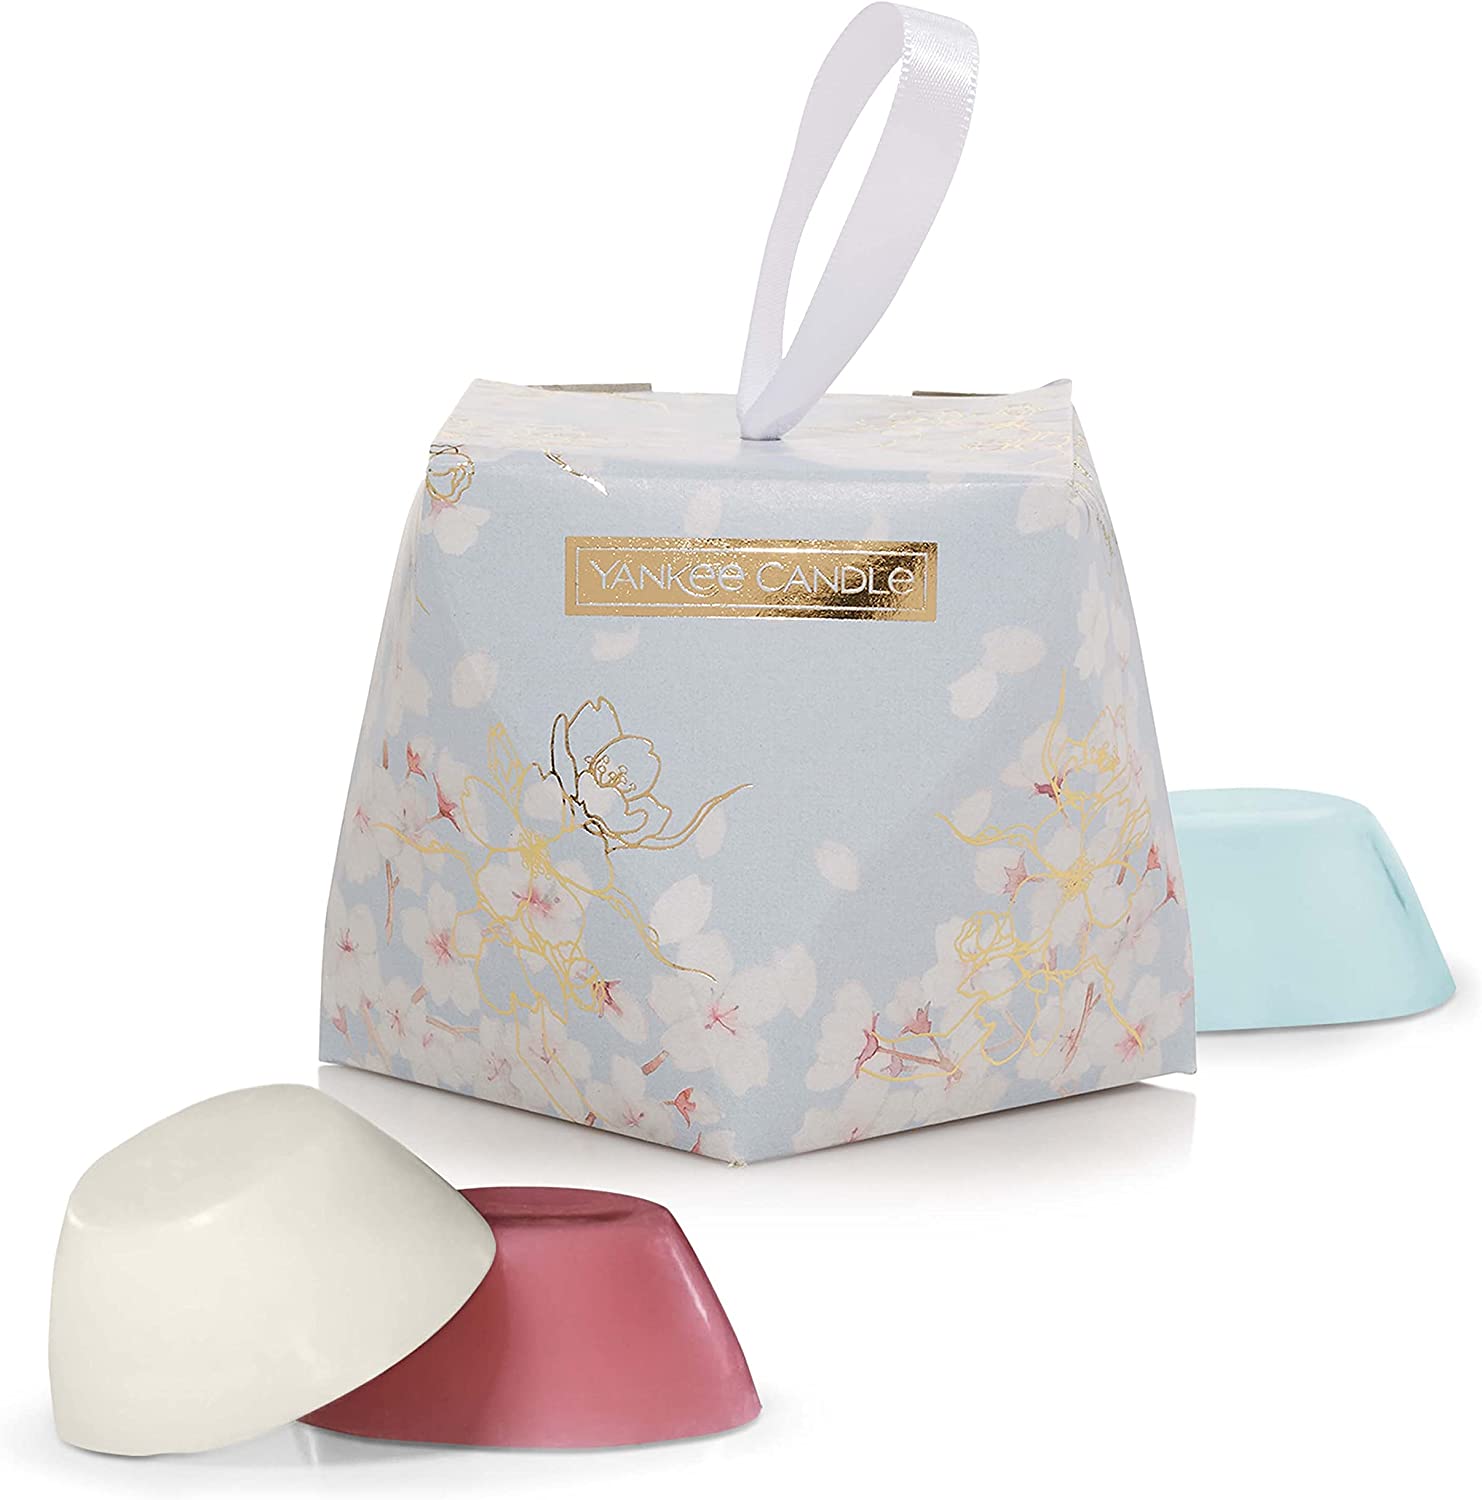 Yankee Candle Gift Set 3 Scented Wax Melts in a Floral Gift Box